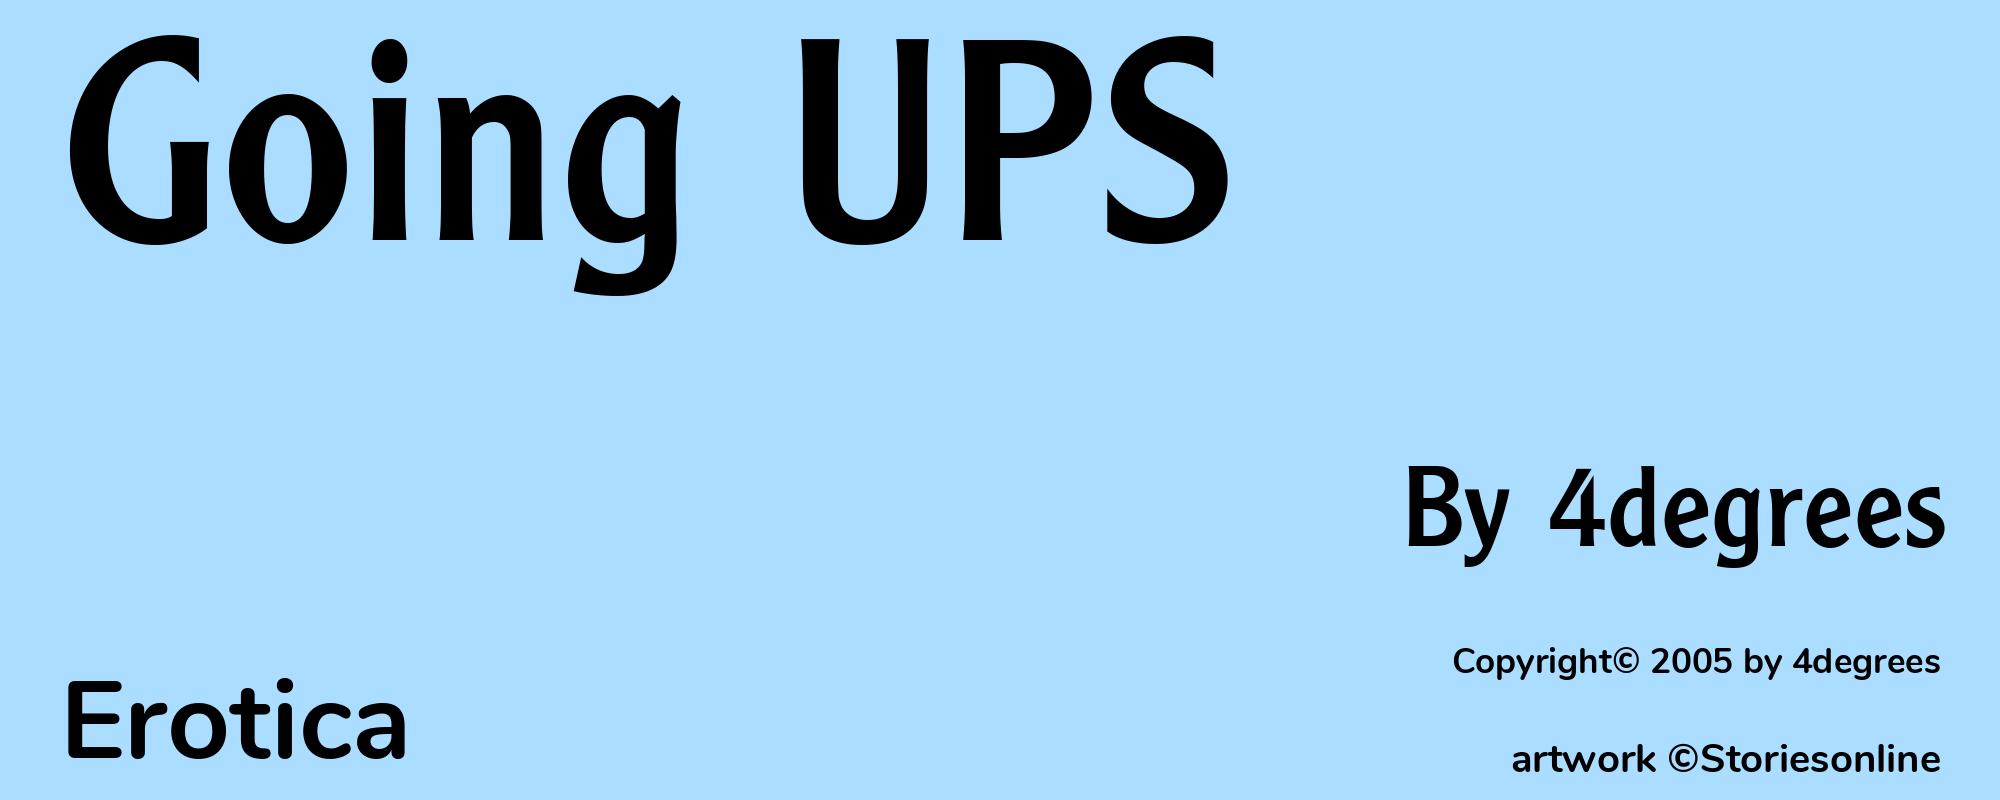 Going UPS - Cover